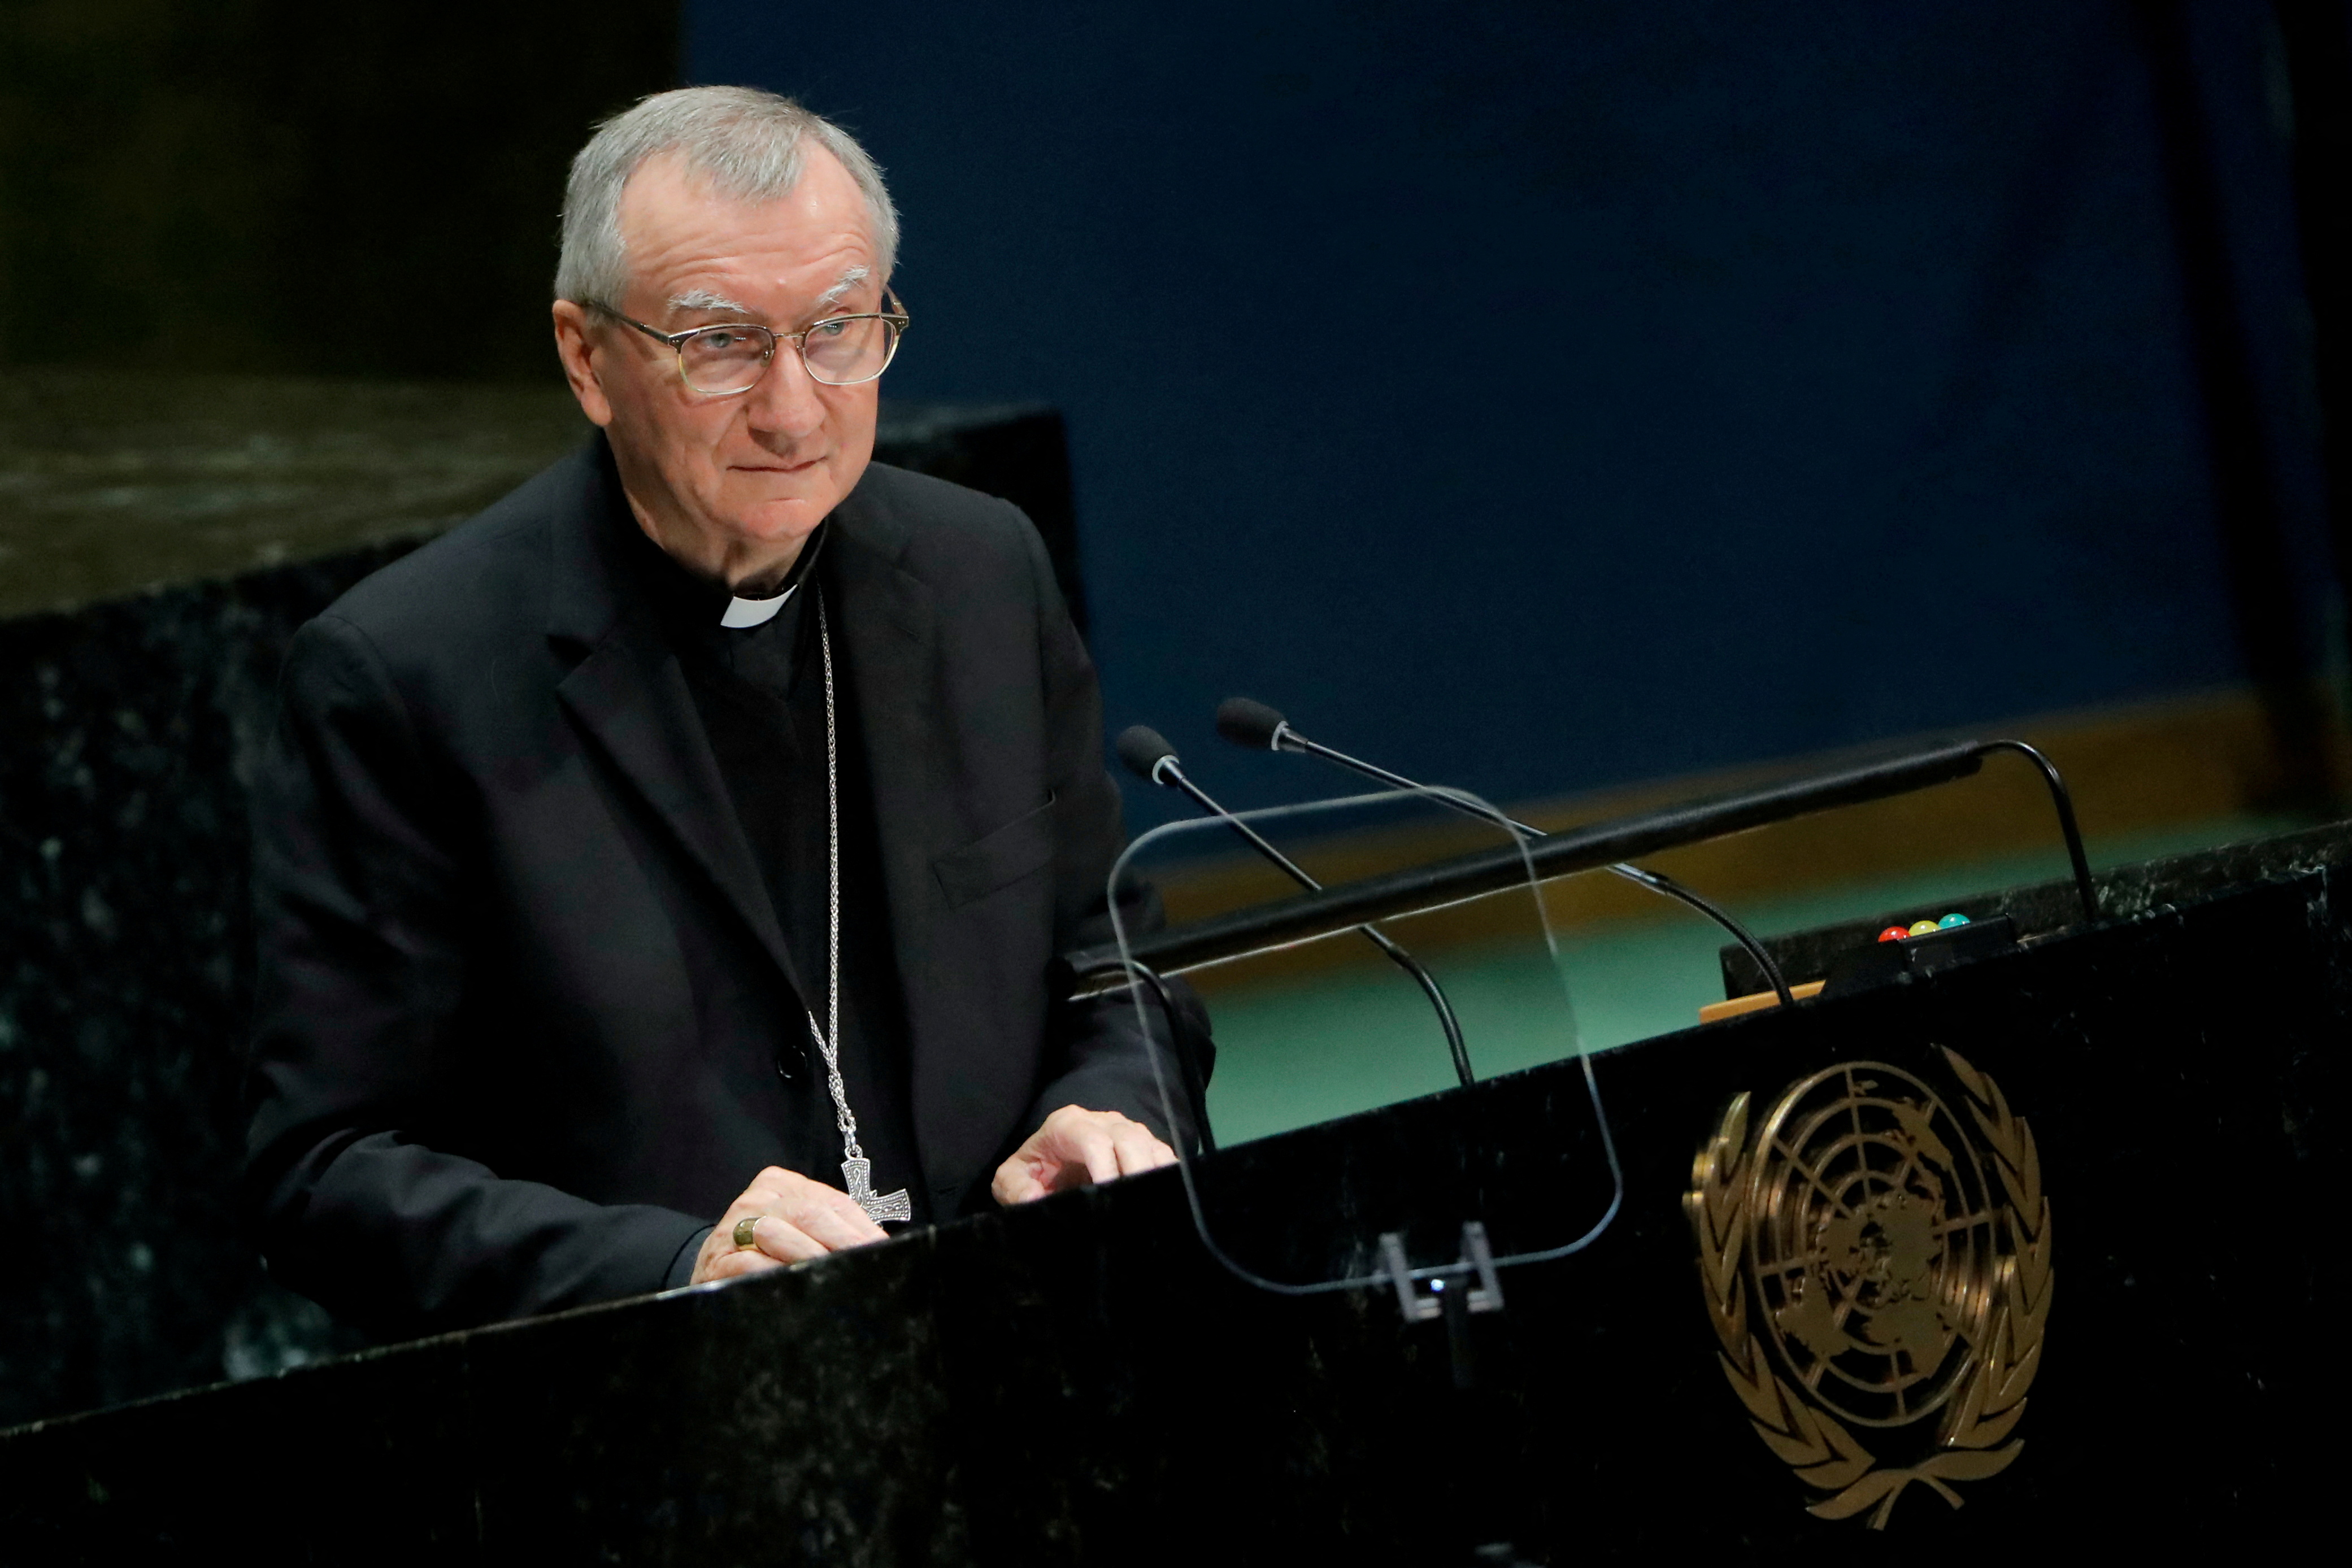 Secretary of State of the Holy See Cardinal Pietro Parolin addresses the 74th session of the United Nations General Assembly at U.N. headquarters in New York City, New York